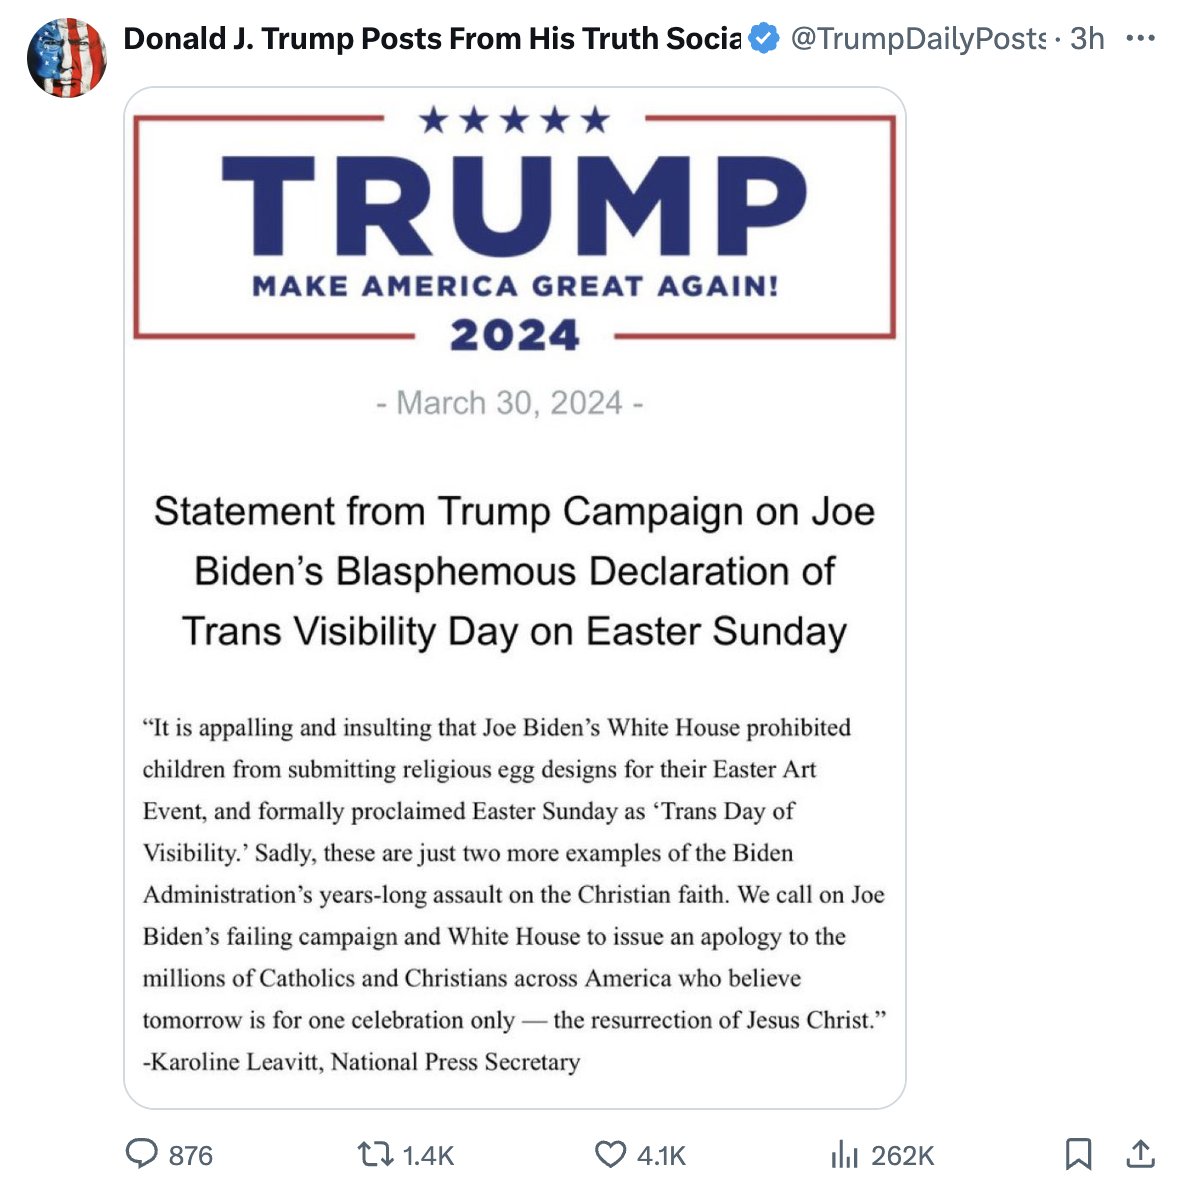 COMMUNITY NOTE: President Joe Biden is a devout Christian long deemed a defender of religious freedom. Donald Trump is a rapist, adulterer, bigot, Islamophobe, antisemite, fraudster, and *atheist* who’s never read the Bible, doesn’t follow any Commandments, and faces 88 felonies.